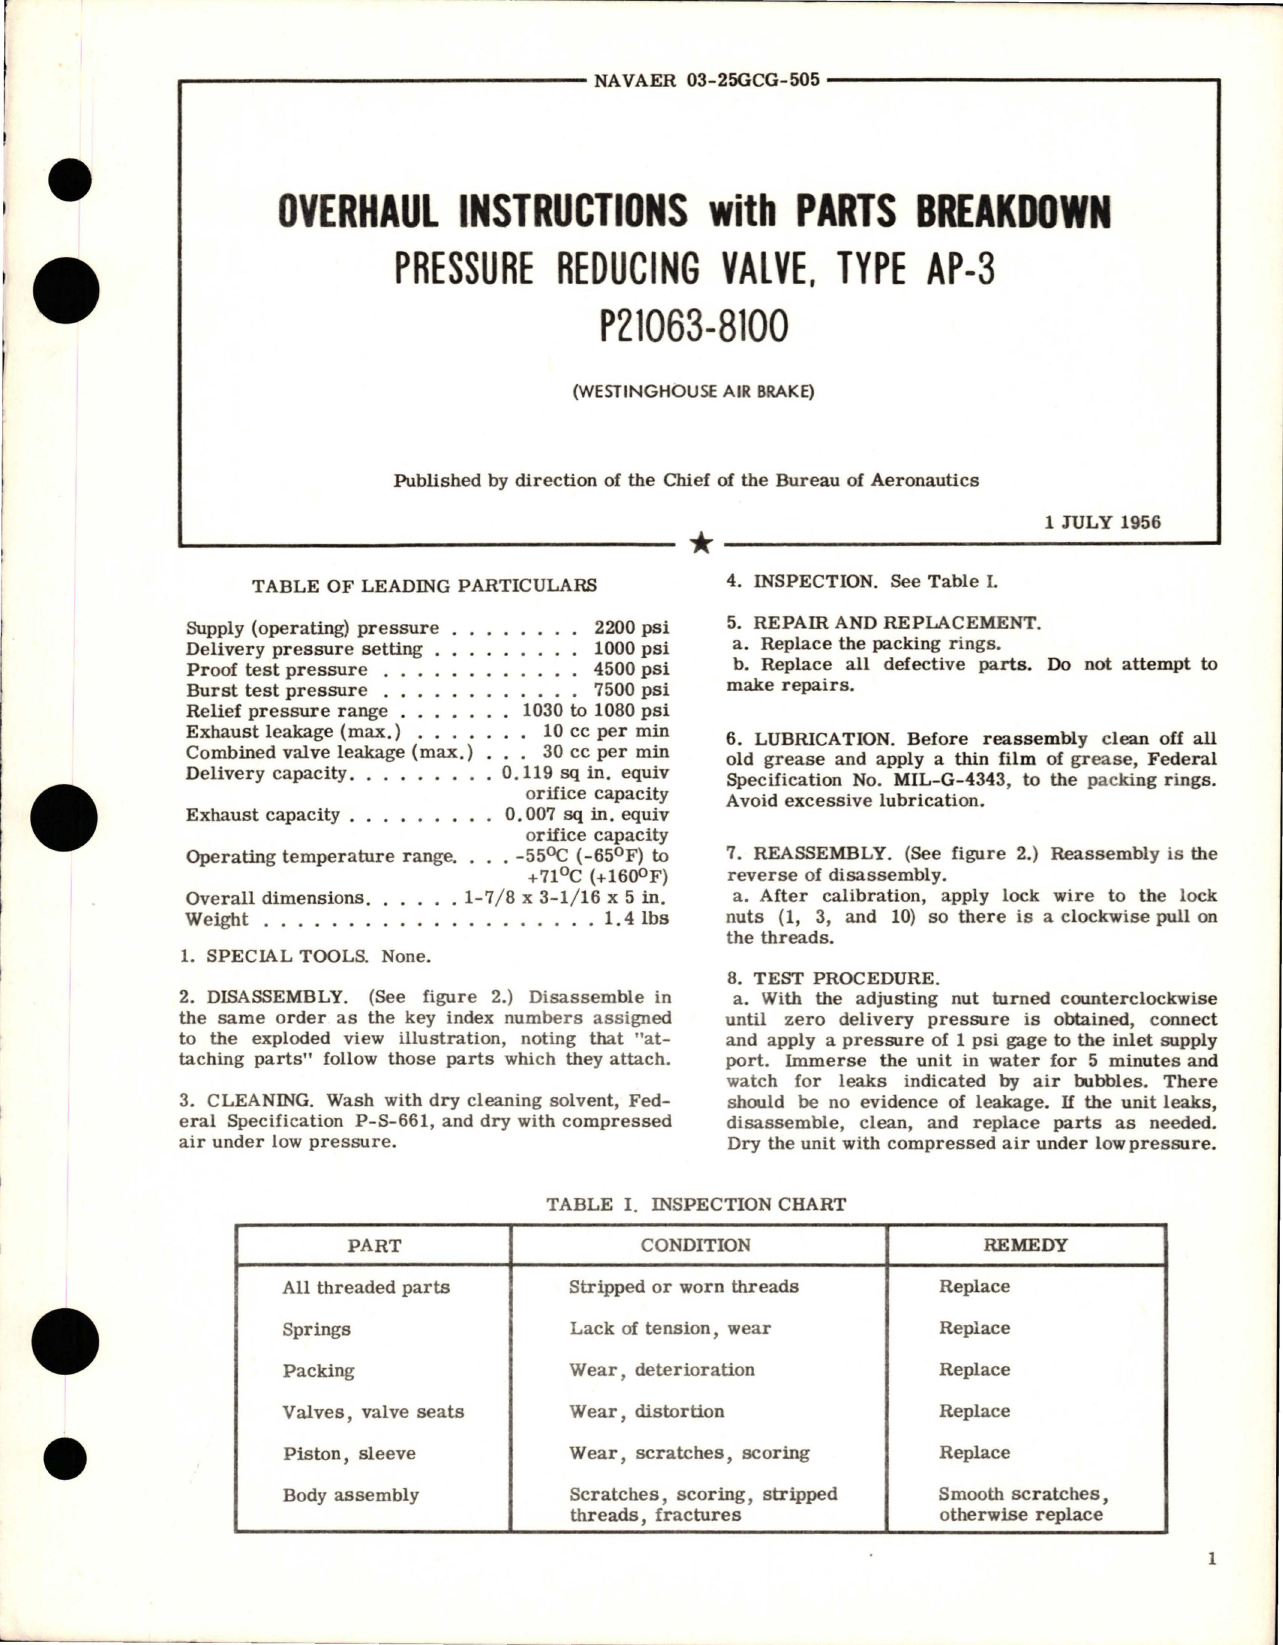 Sample page 1 from AirCorps Library document: Overhaul Instructions with Parts Breakdown for Type AP-3 Pressure Reducing Valve - P21063-8100